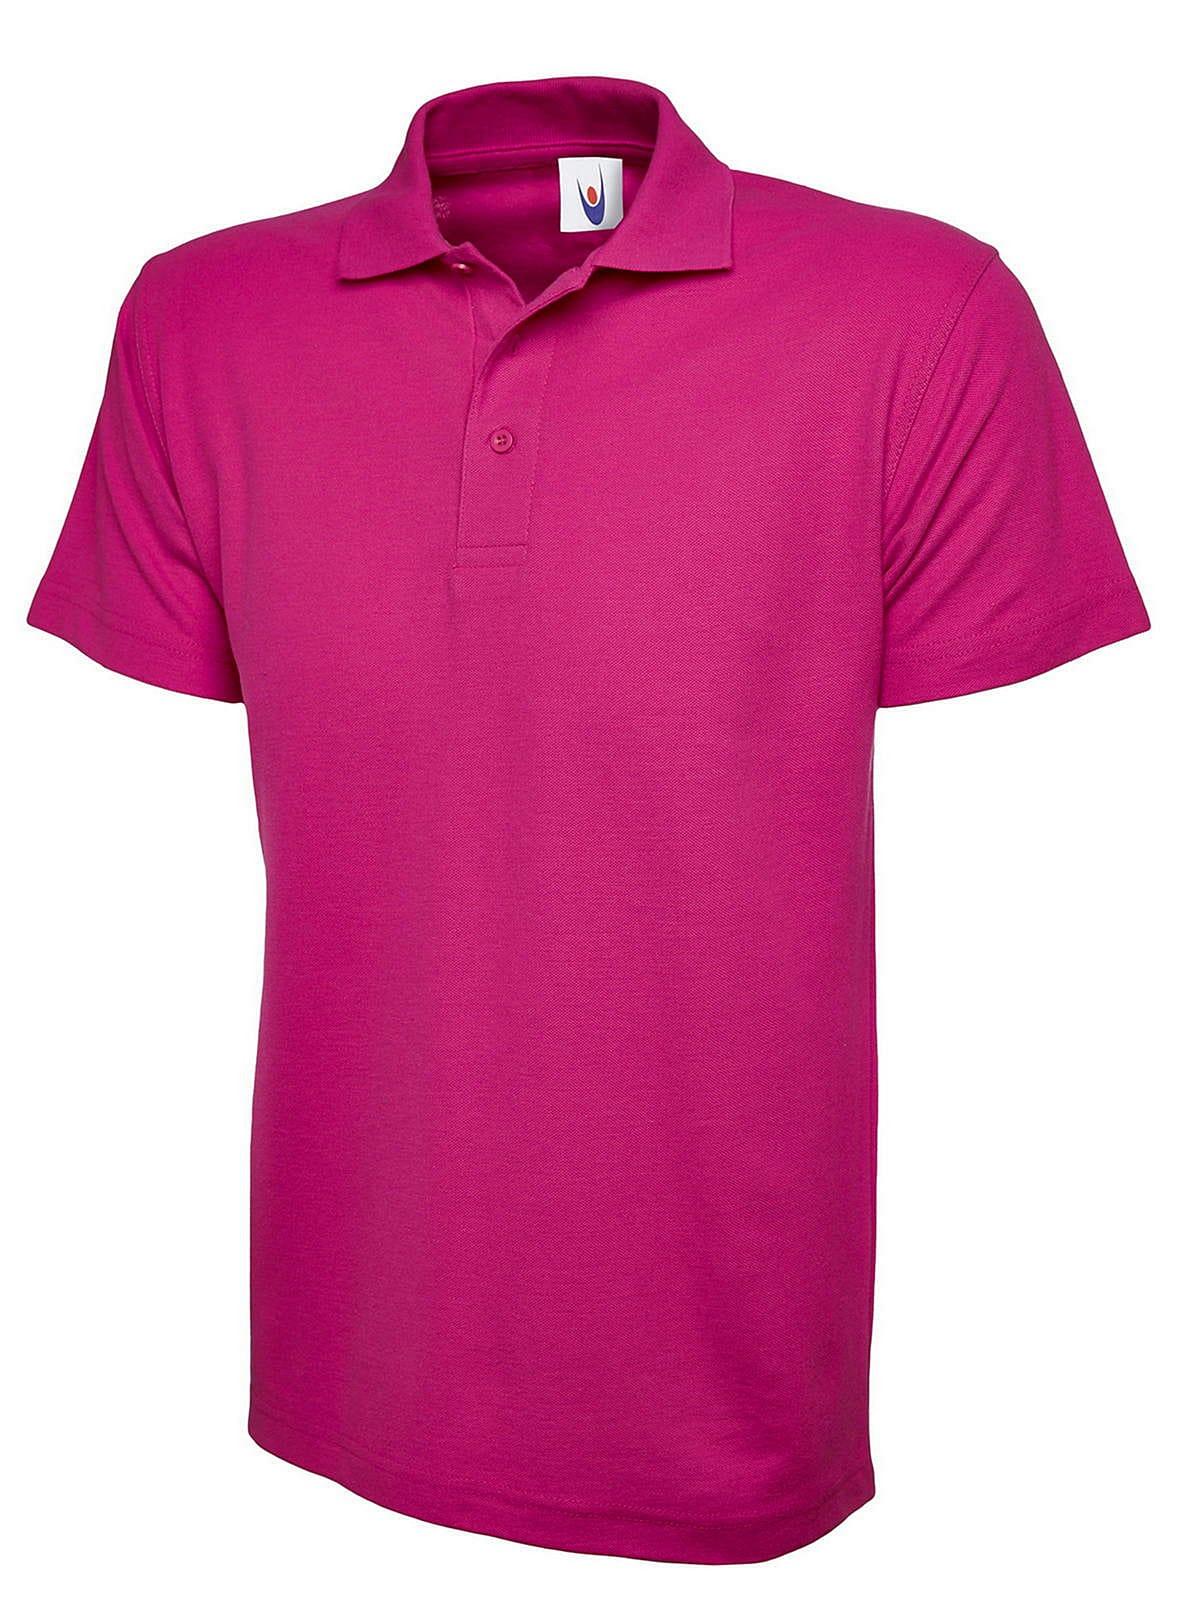 Uneek 220GSM Classic Polo Shirt in Hot Pink (Product Code: UC101)